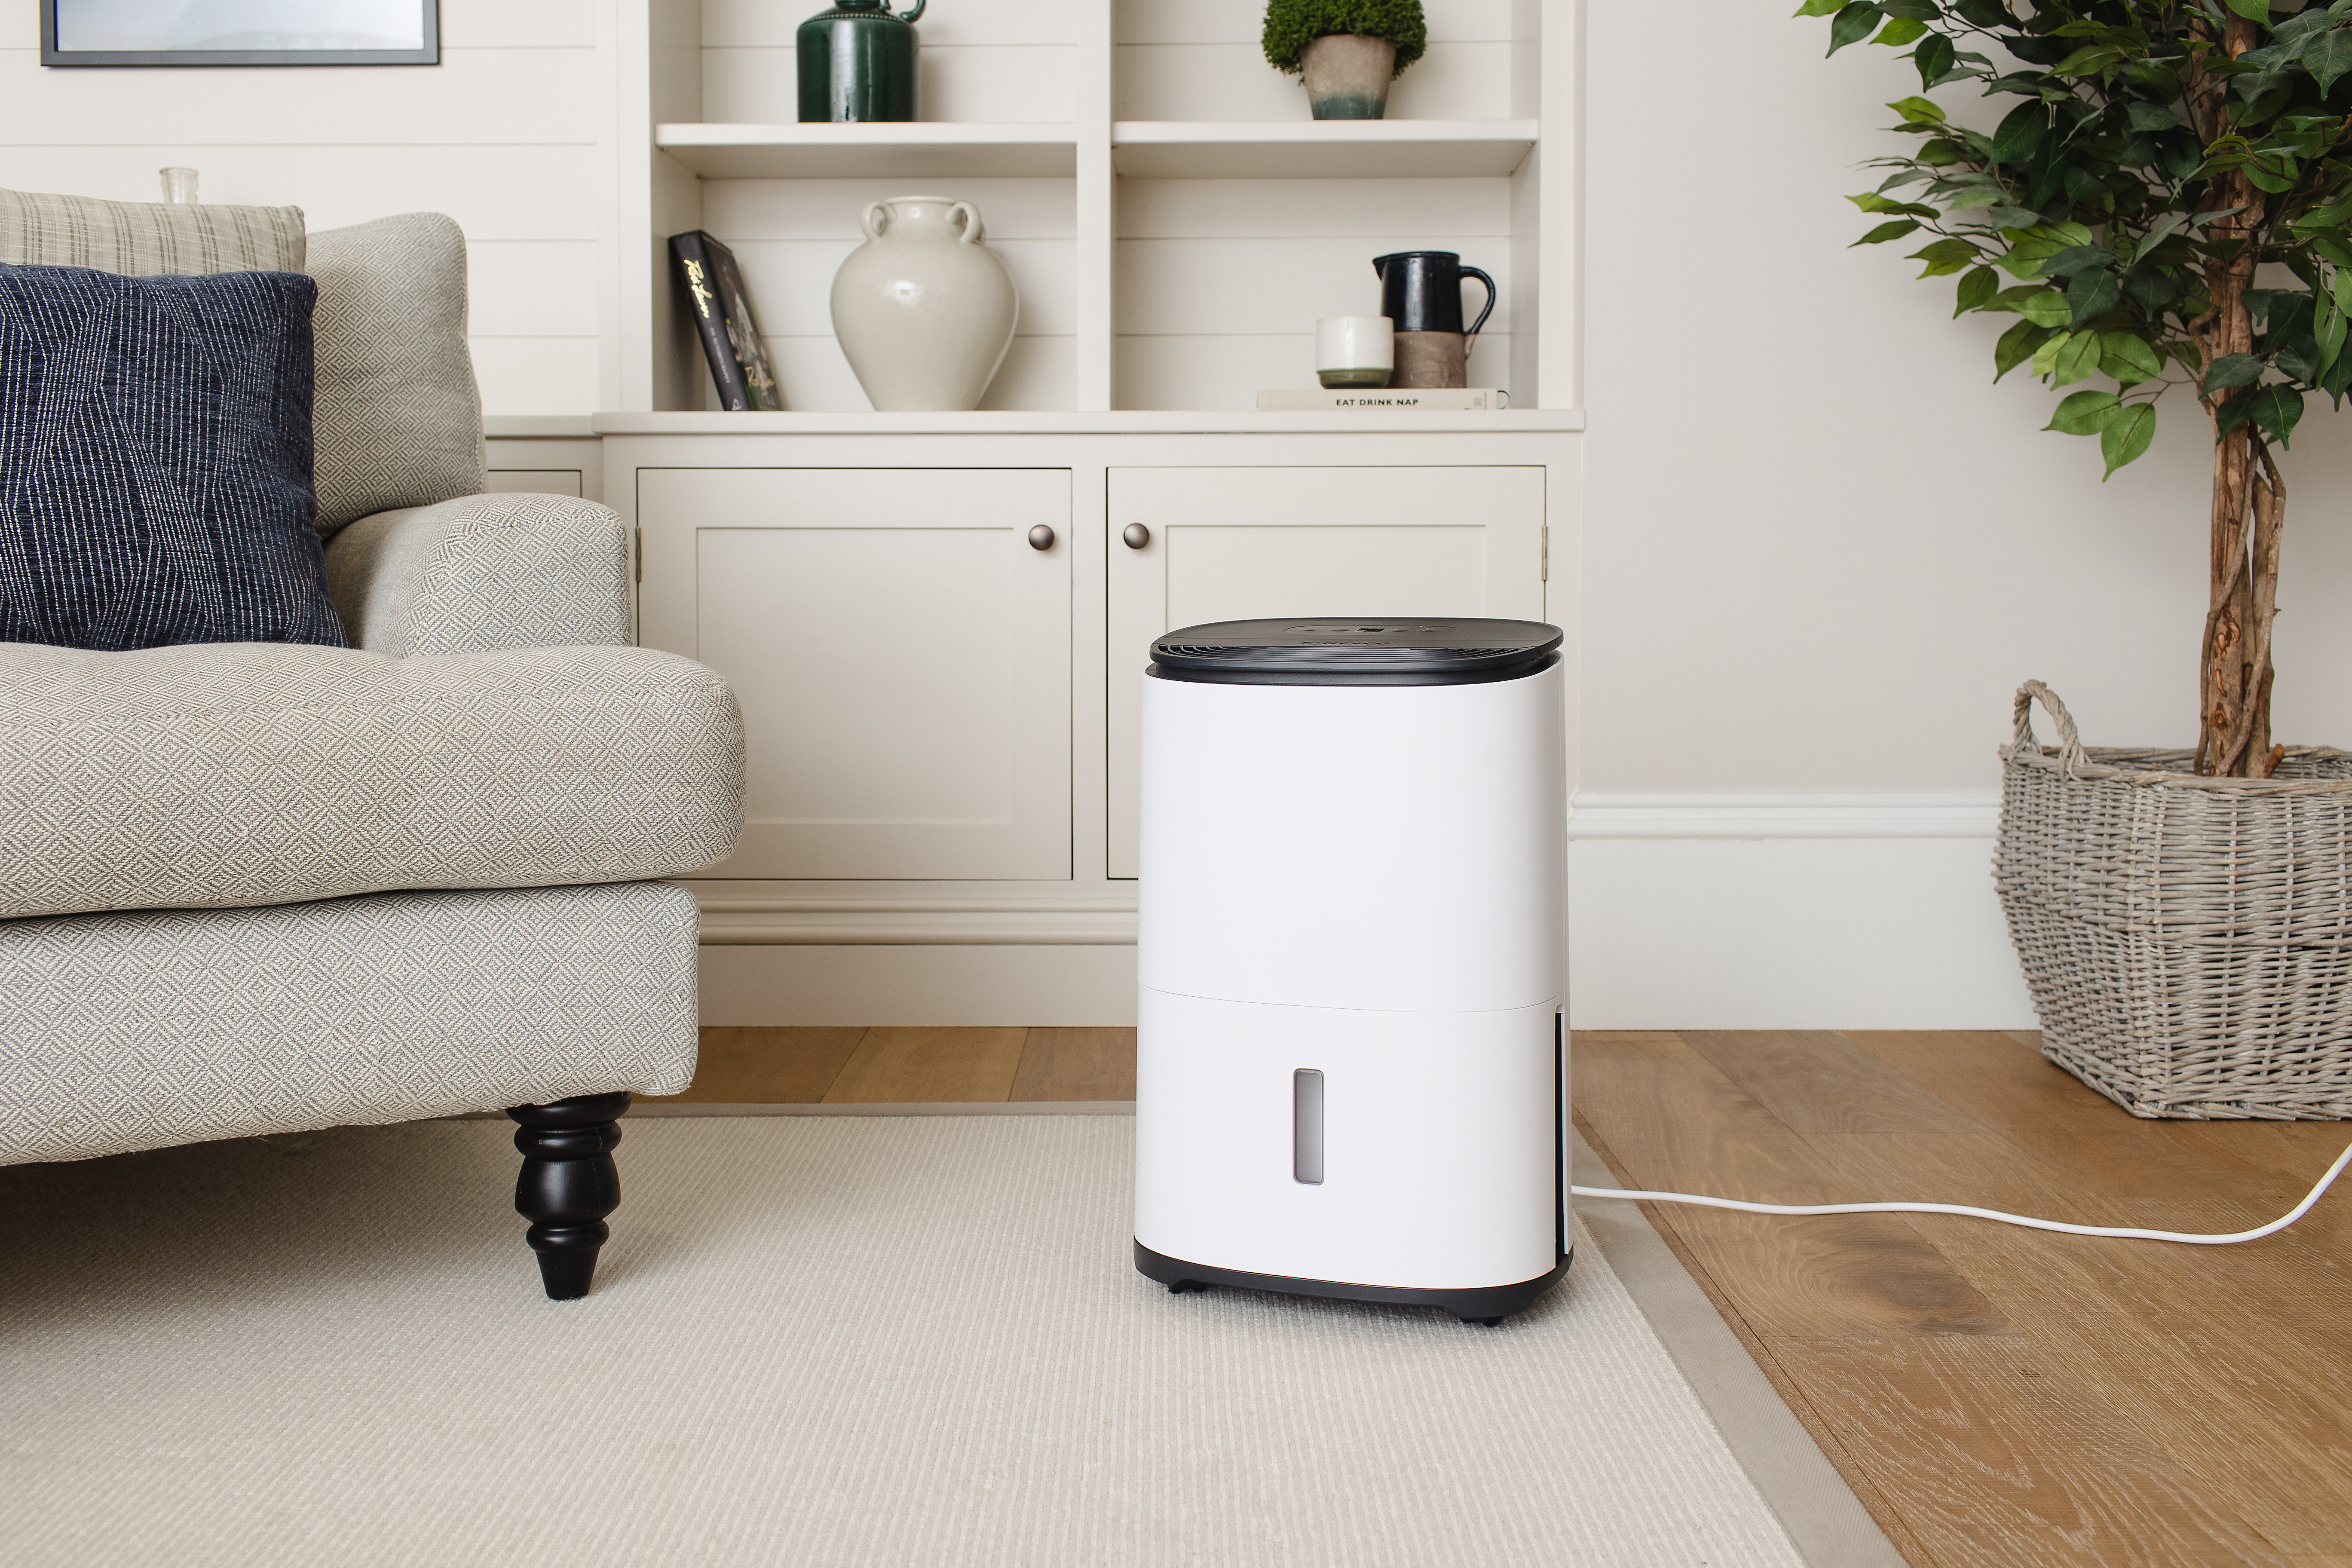 MeacoDry Arete® One 12L Dehumidifier / Air Purifier in a living room